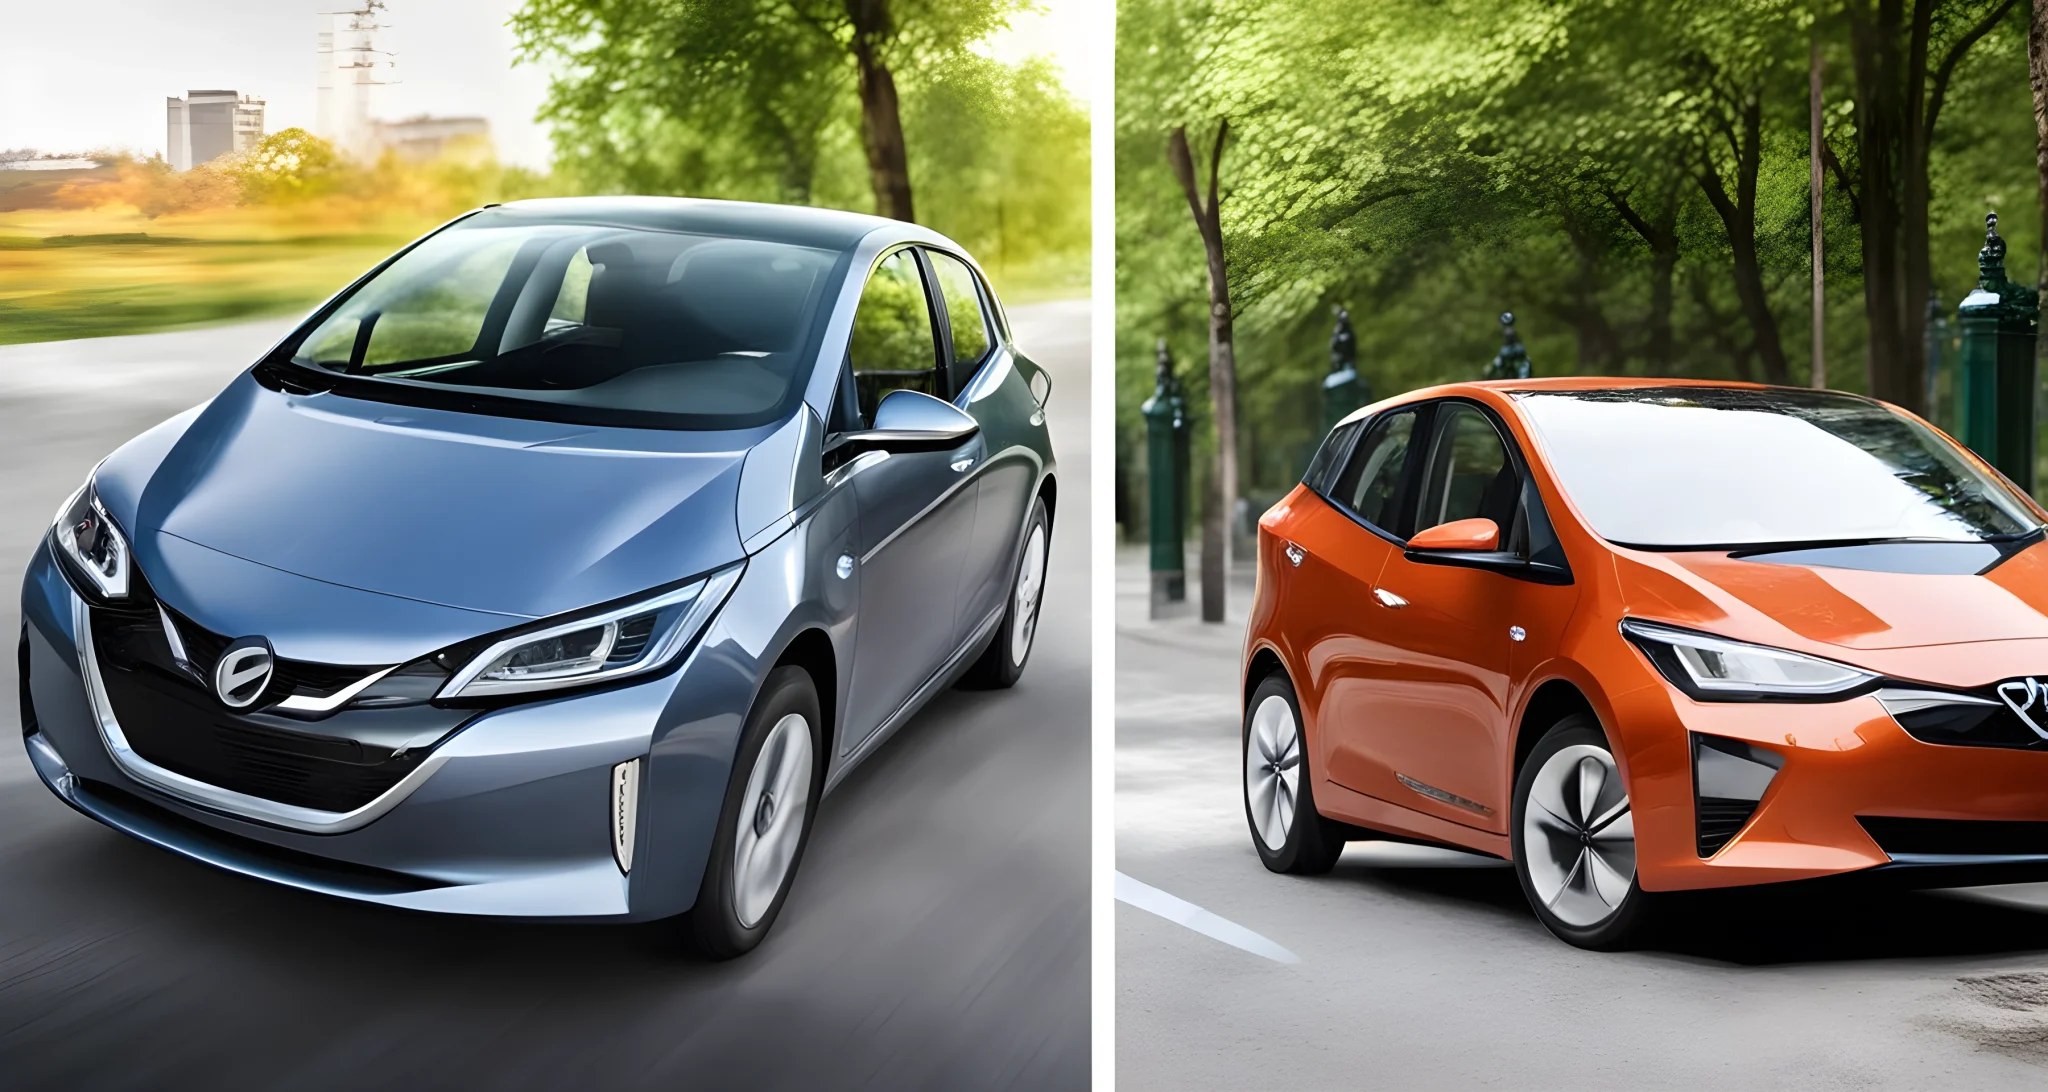 The image shows a side-by-side comparison of an electric vehicle and a hybrid car.